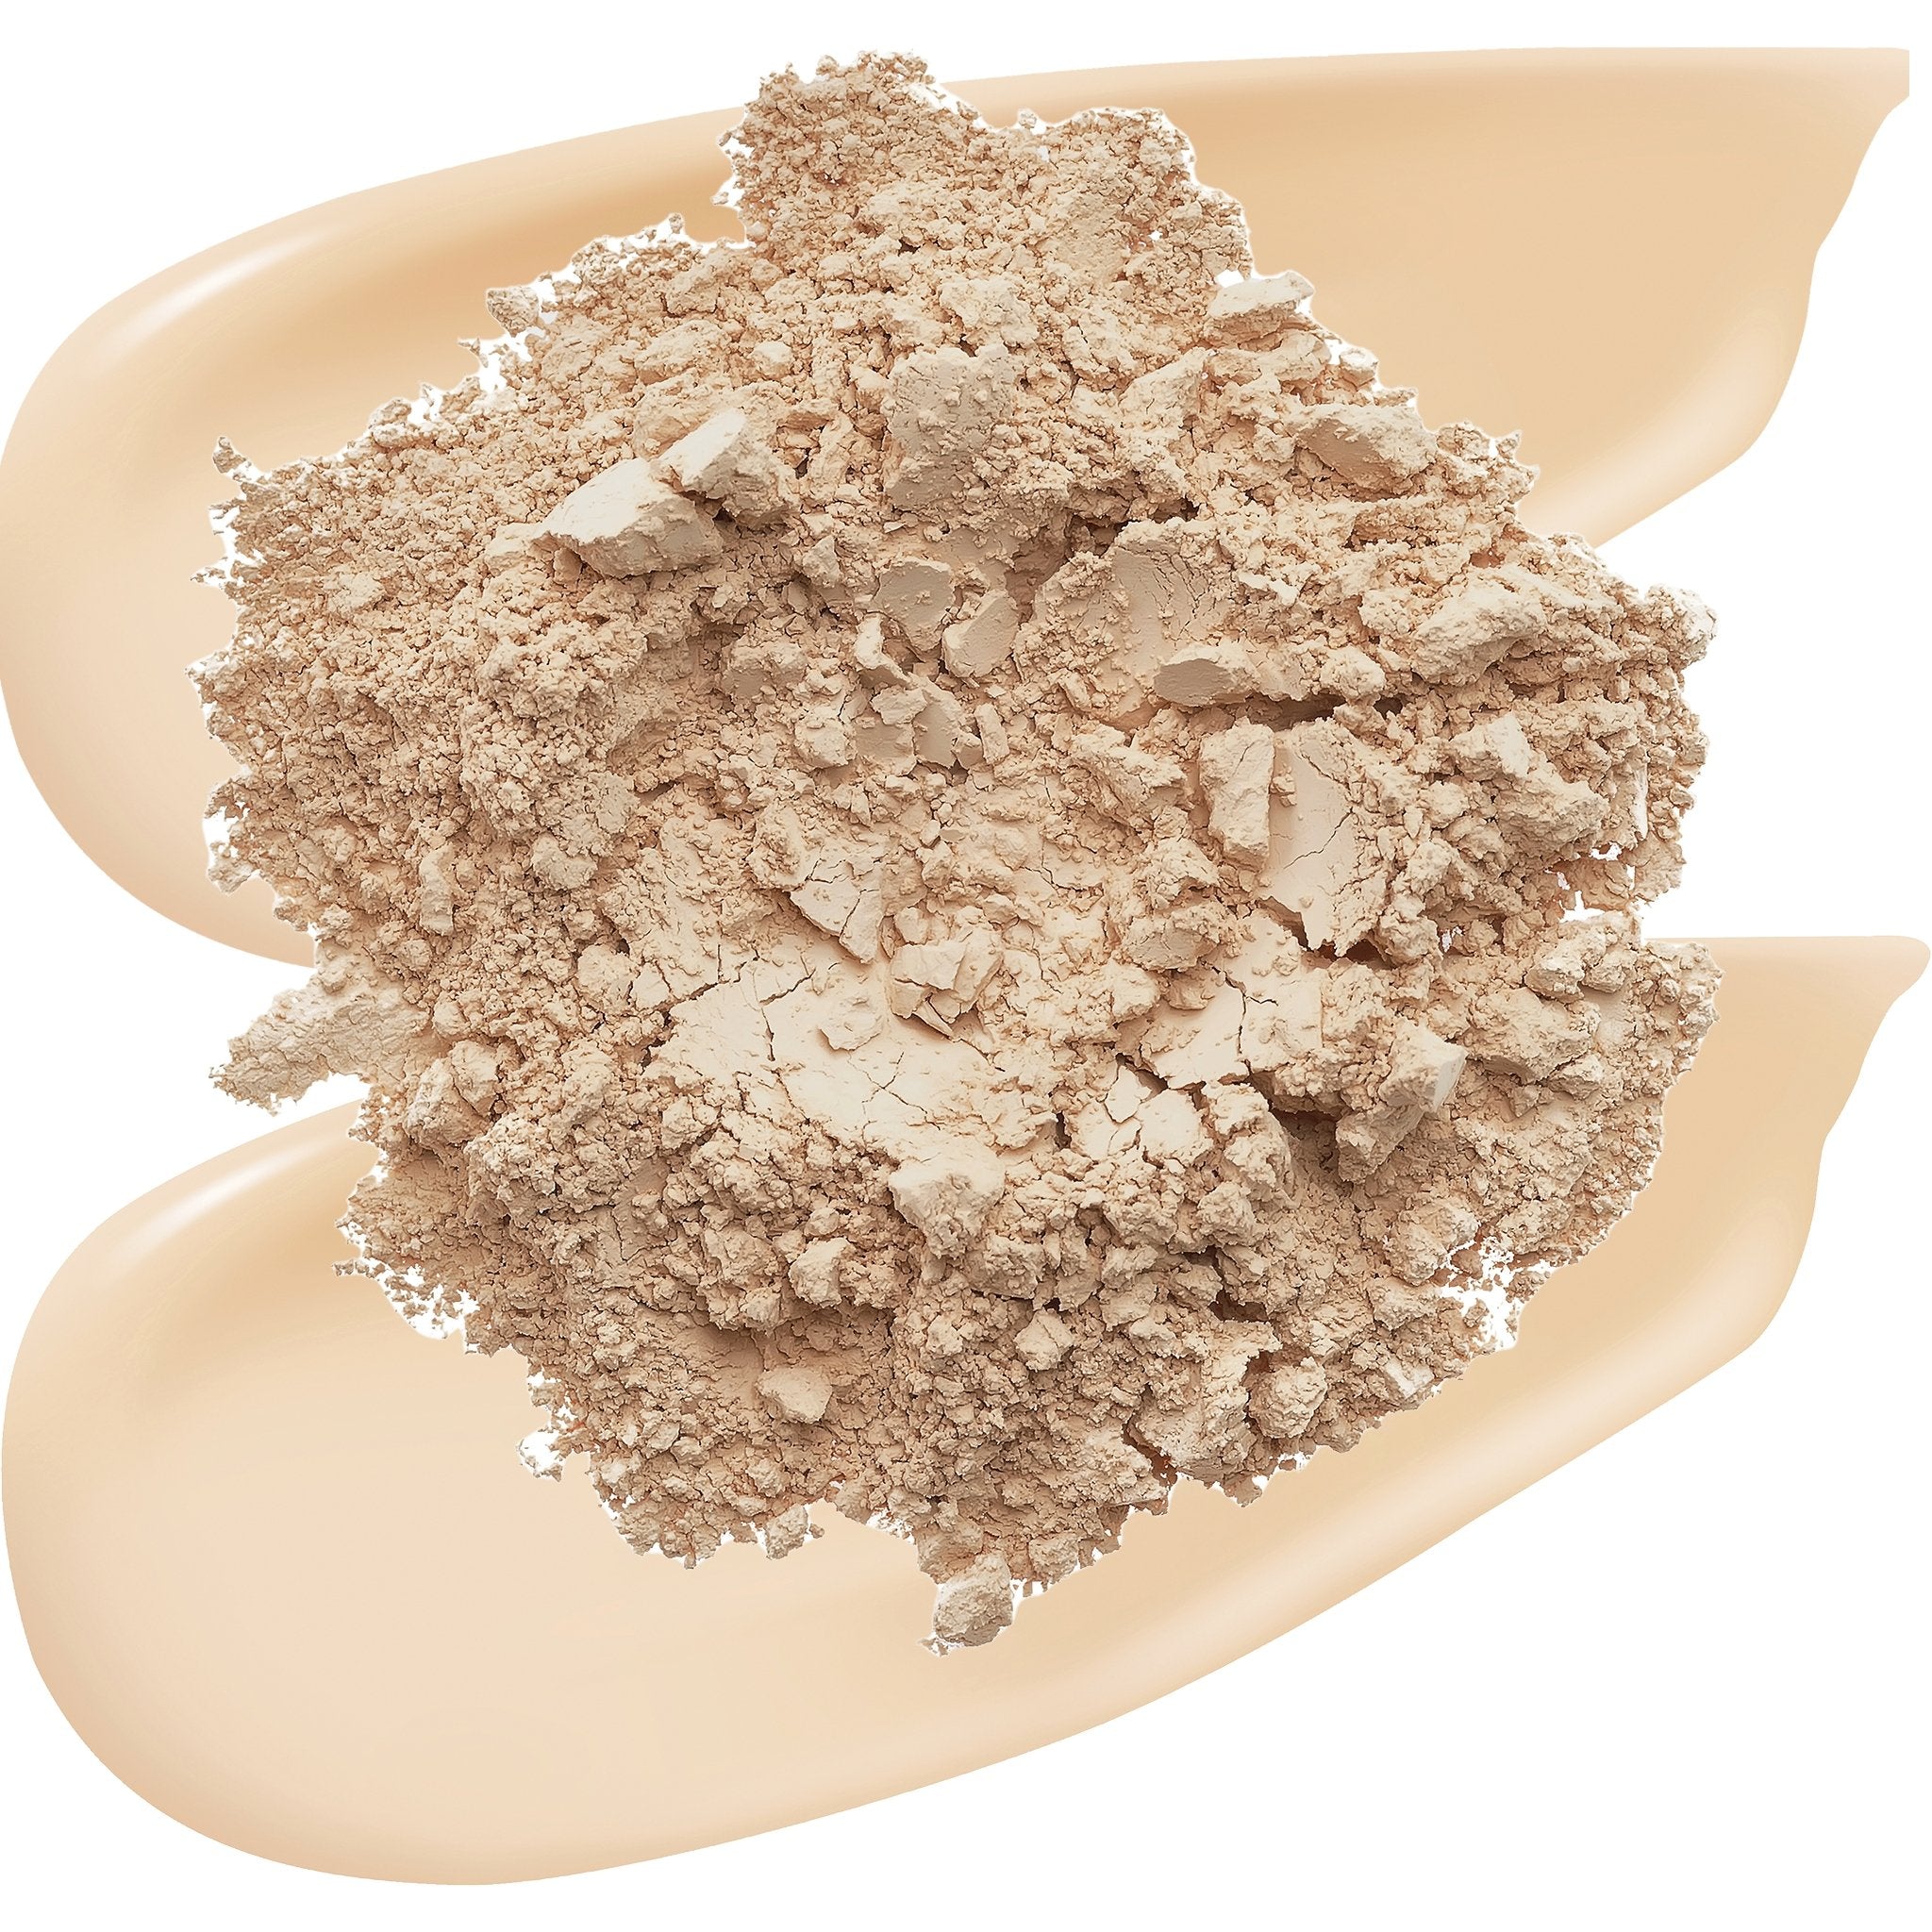 NEW Foundation Trial Set - mypure.co.uk